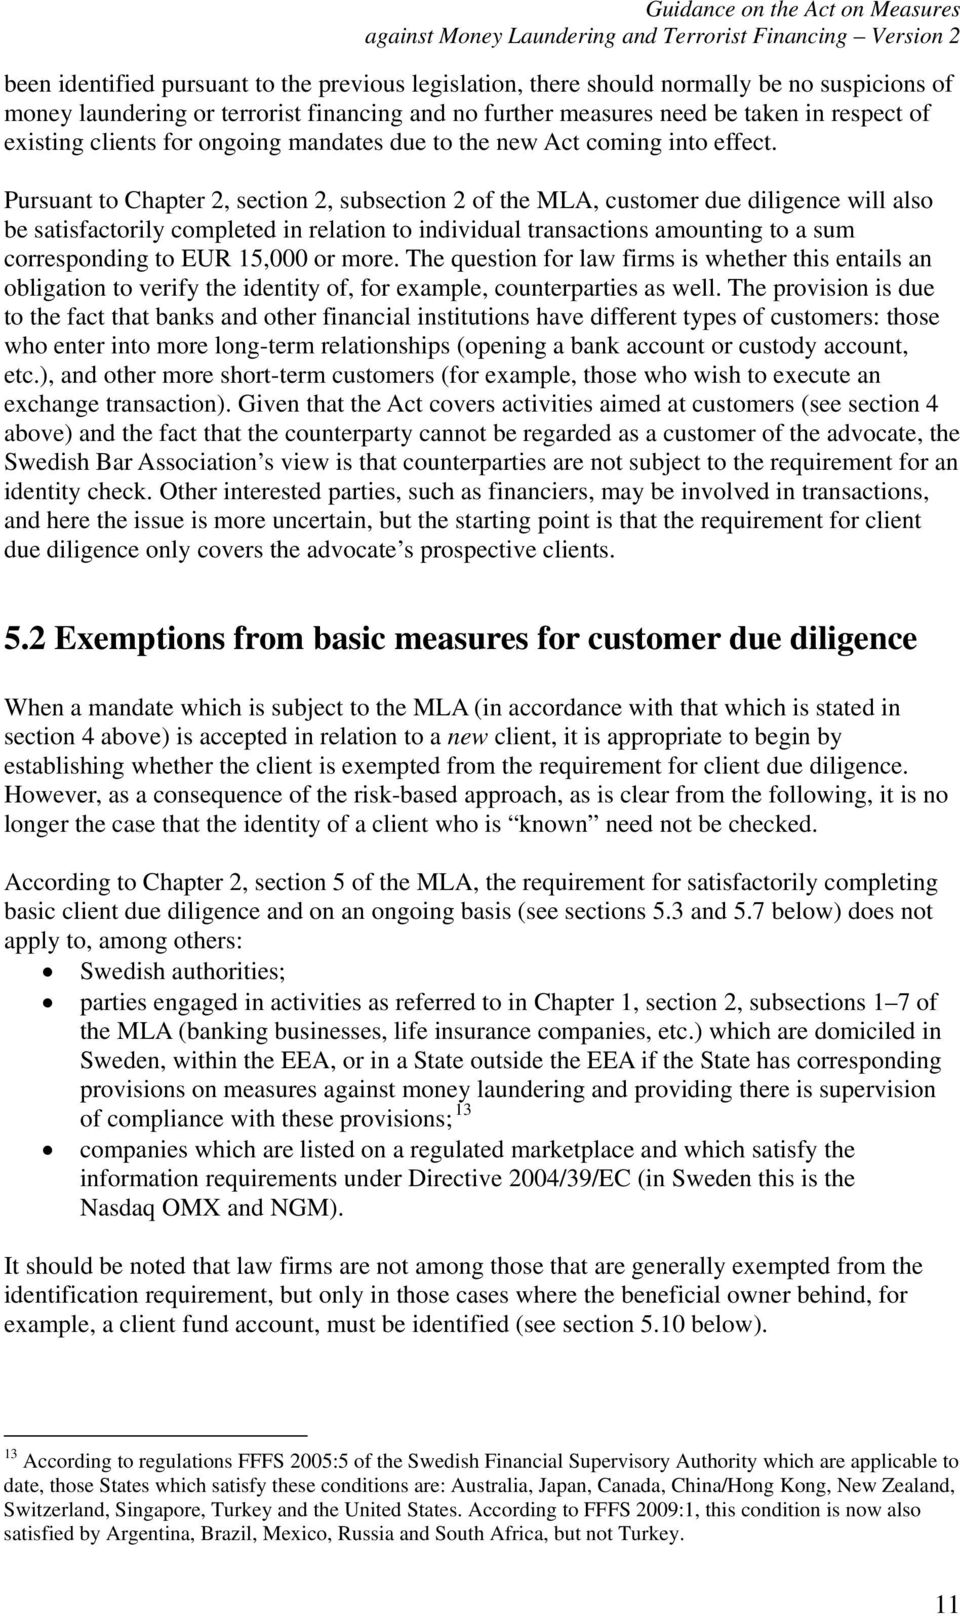 Pursuant to Chapter 2, section 2, subsection 2 of the MLA, customer due diligence will also be satisfactorily completed in relation to individual transactions amounting to a sum corresponding to EUR